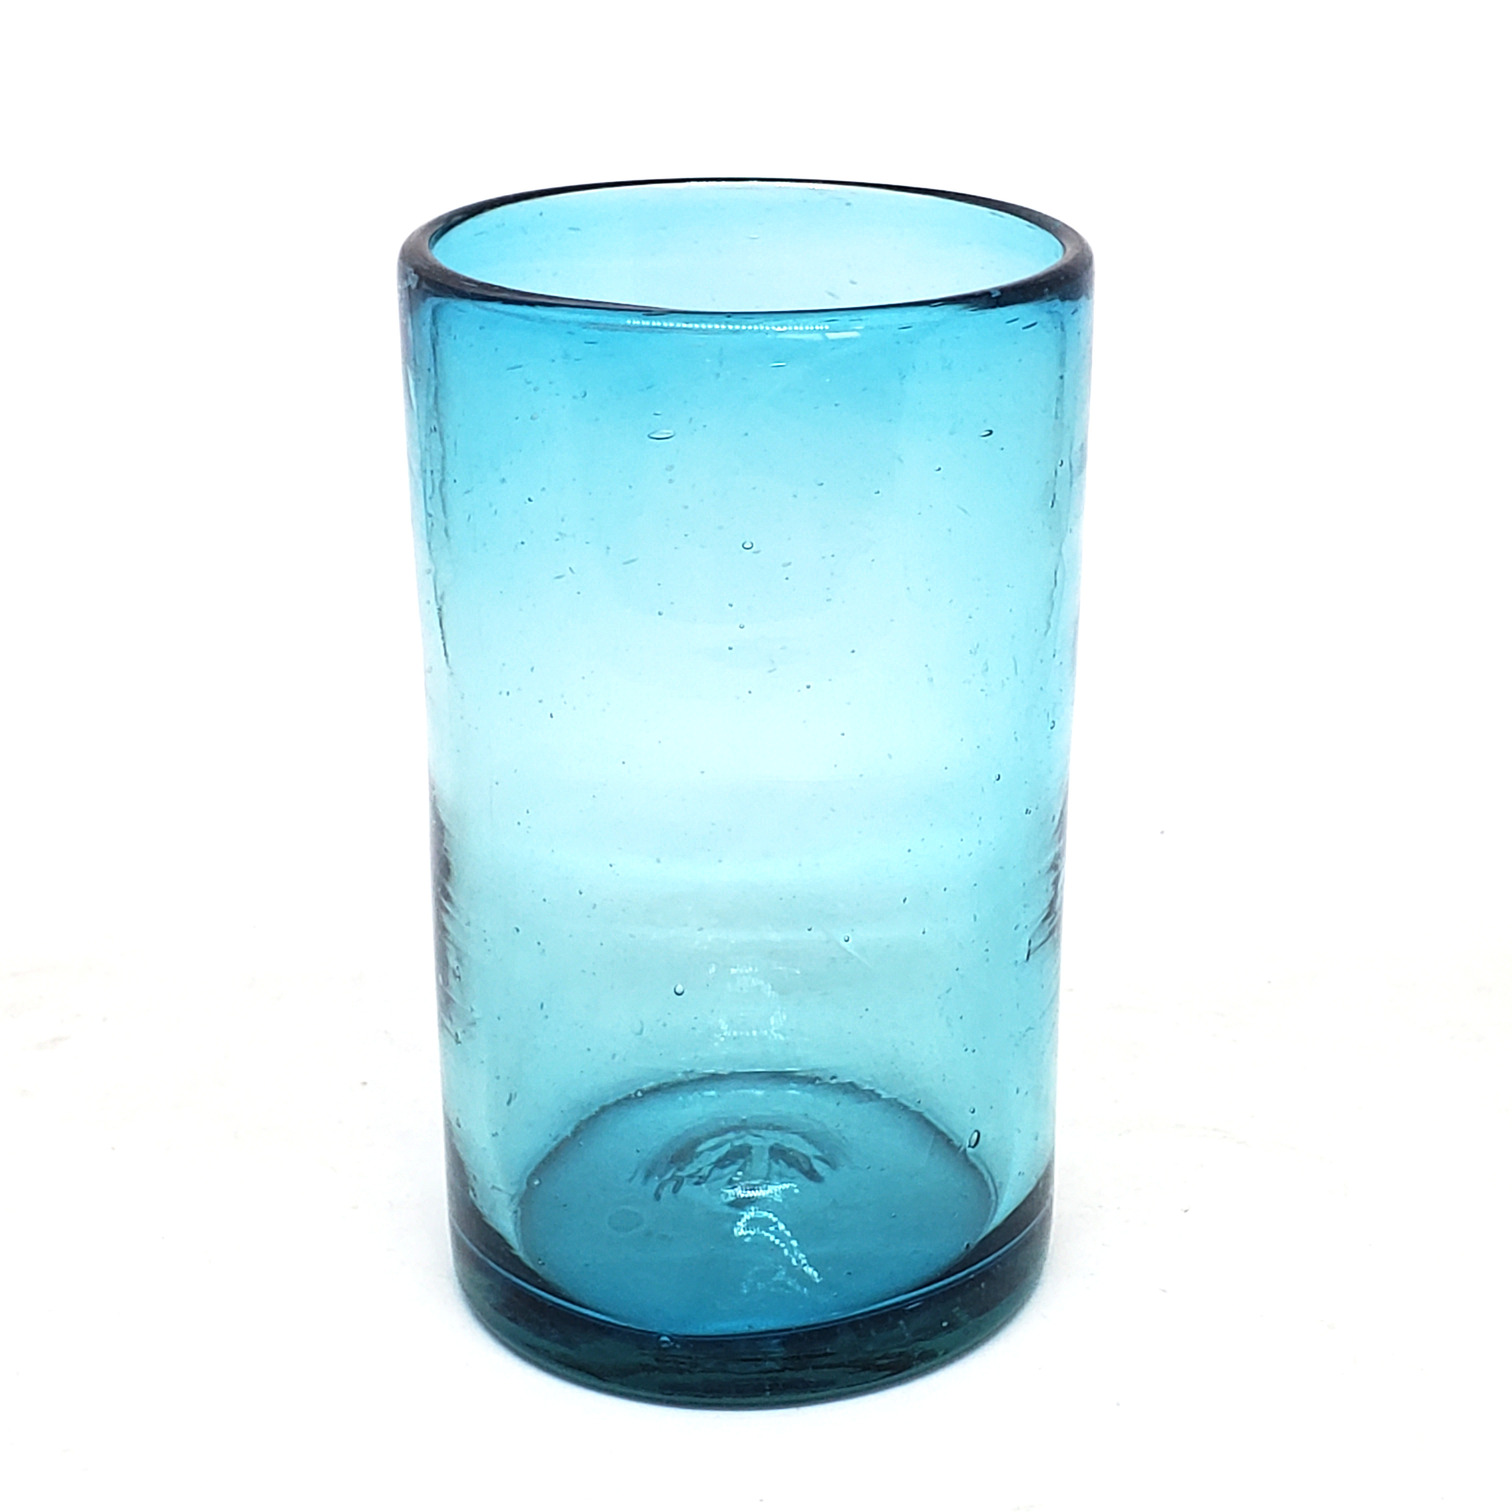 Wholesale Colored Glassware / Solid Aqua Blue 14 oz Drinking Glasses  / These handcrafted glasses deliver a classic touch to your favorite drink.